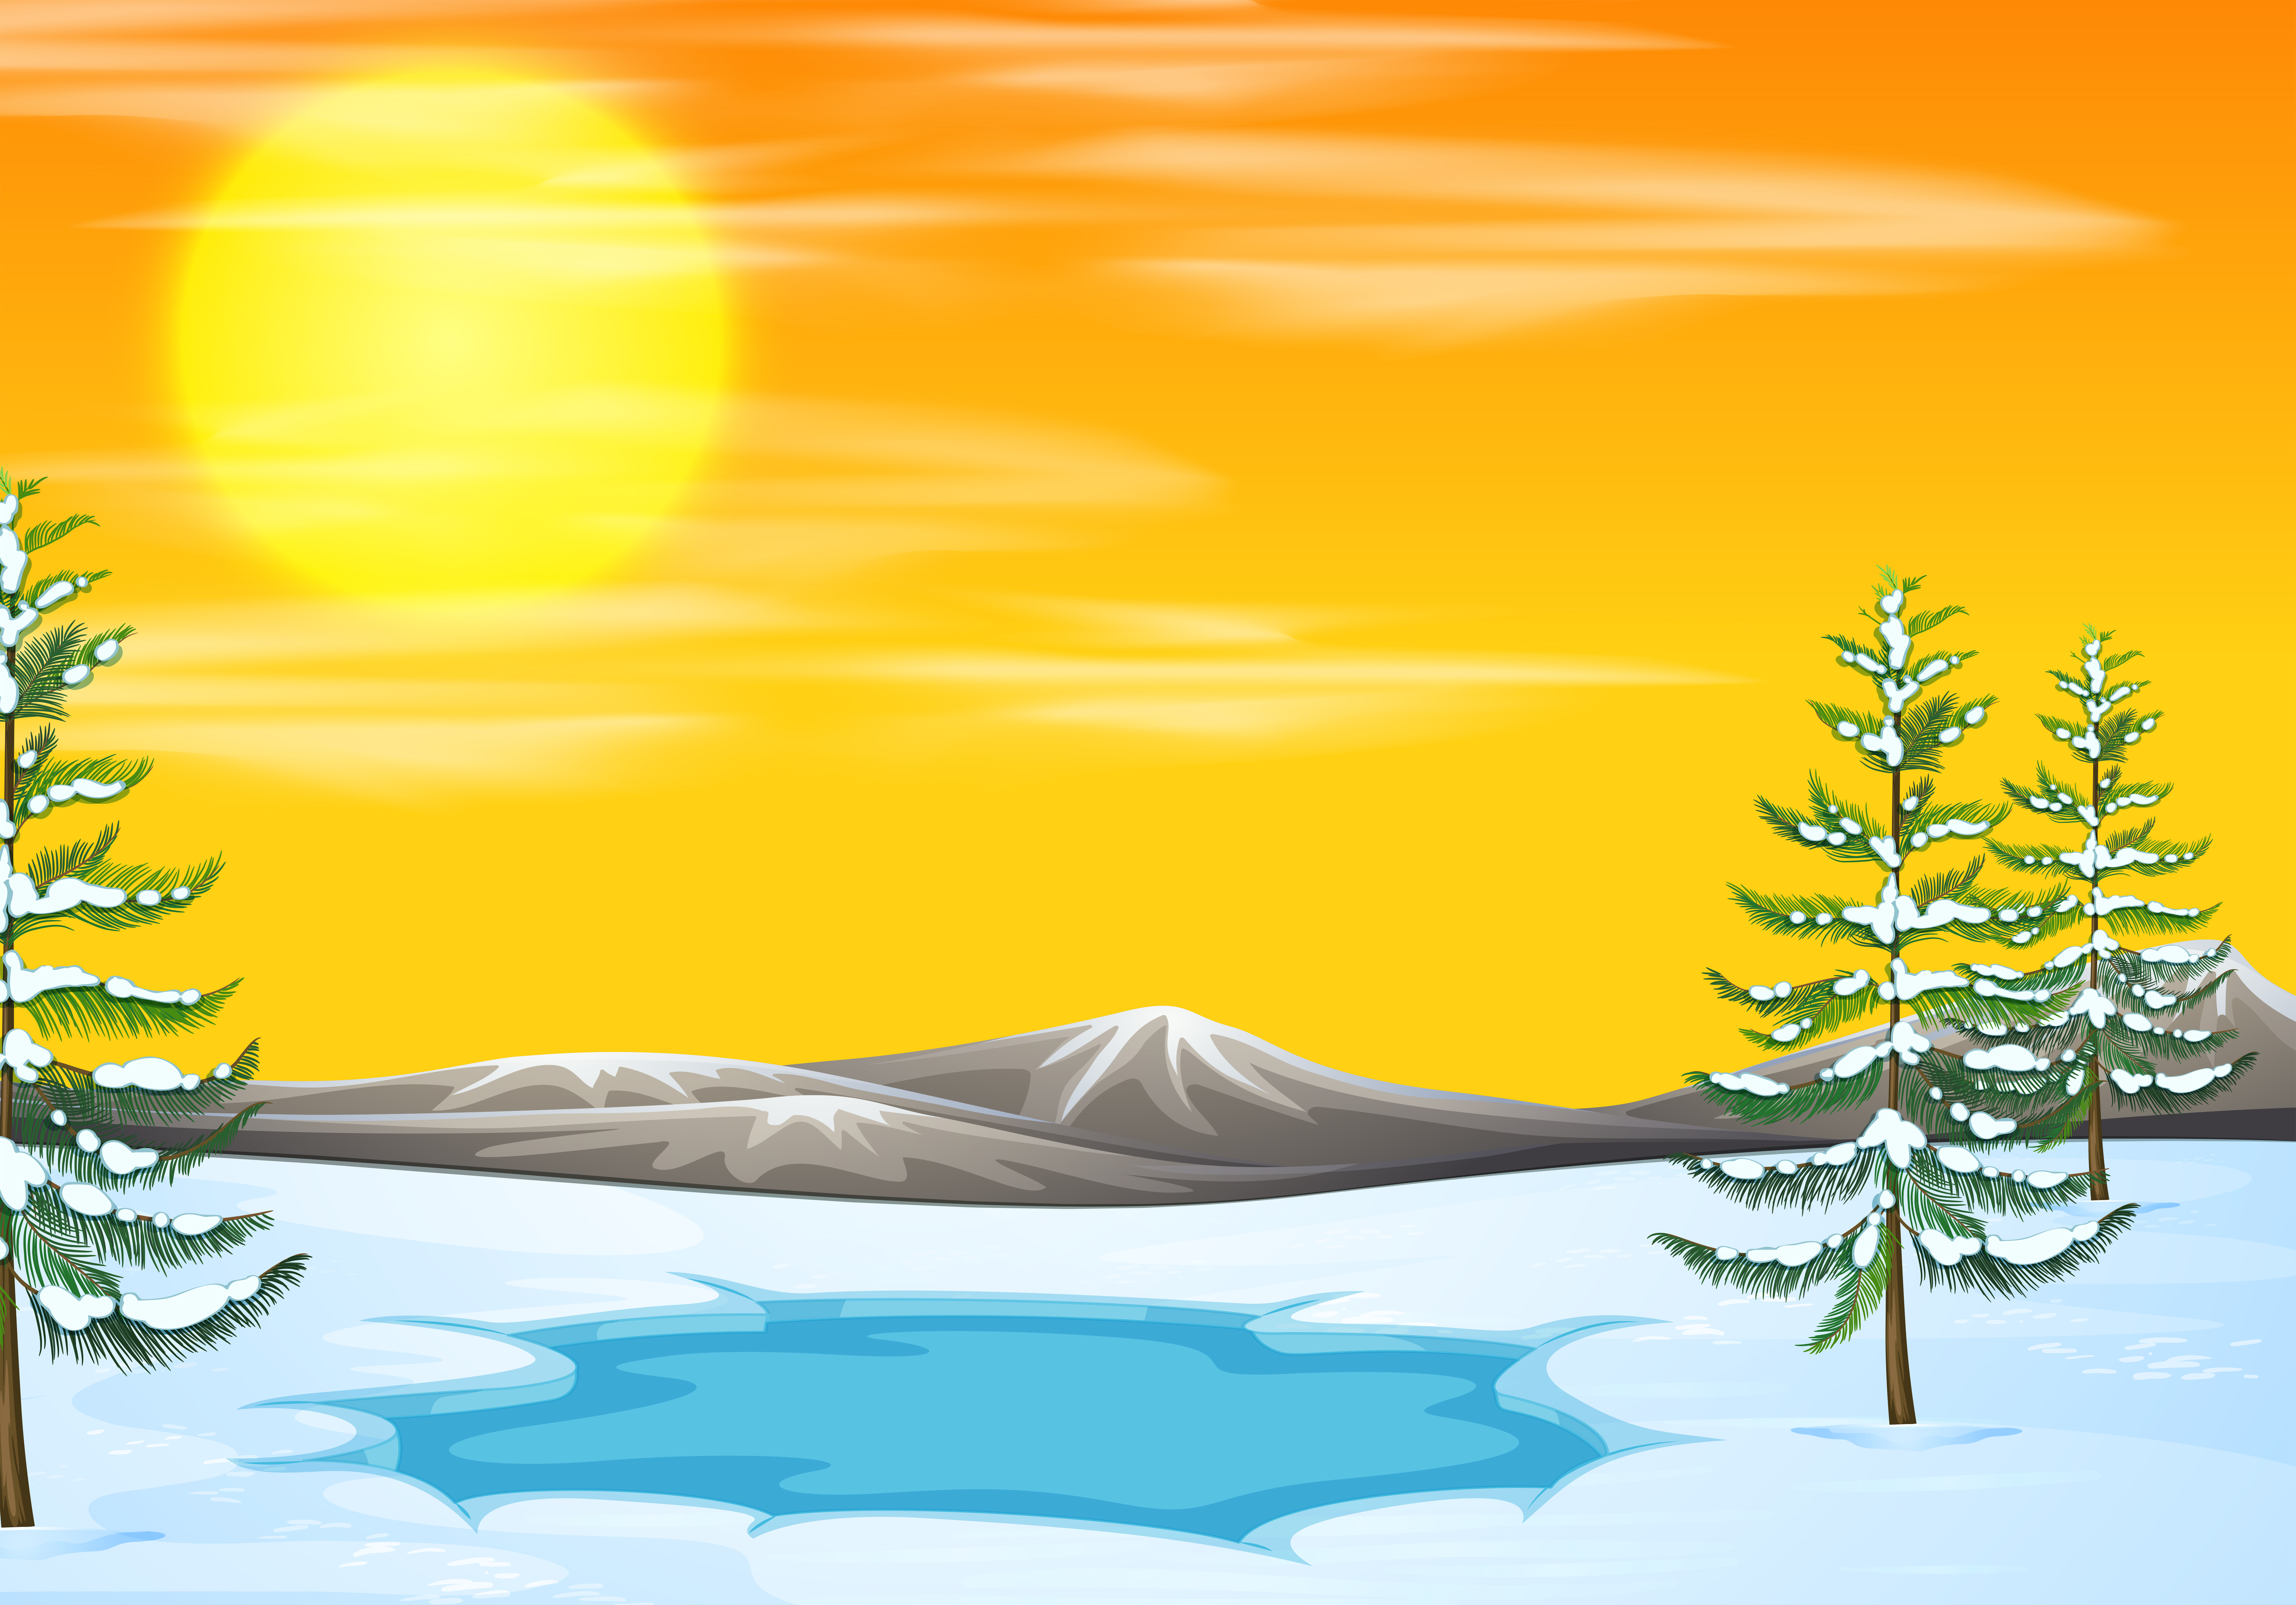 Download Snow scene at sunset - Download Free Vectors, Clipart ...